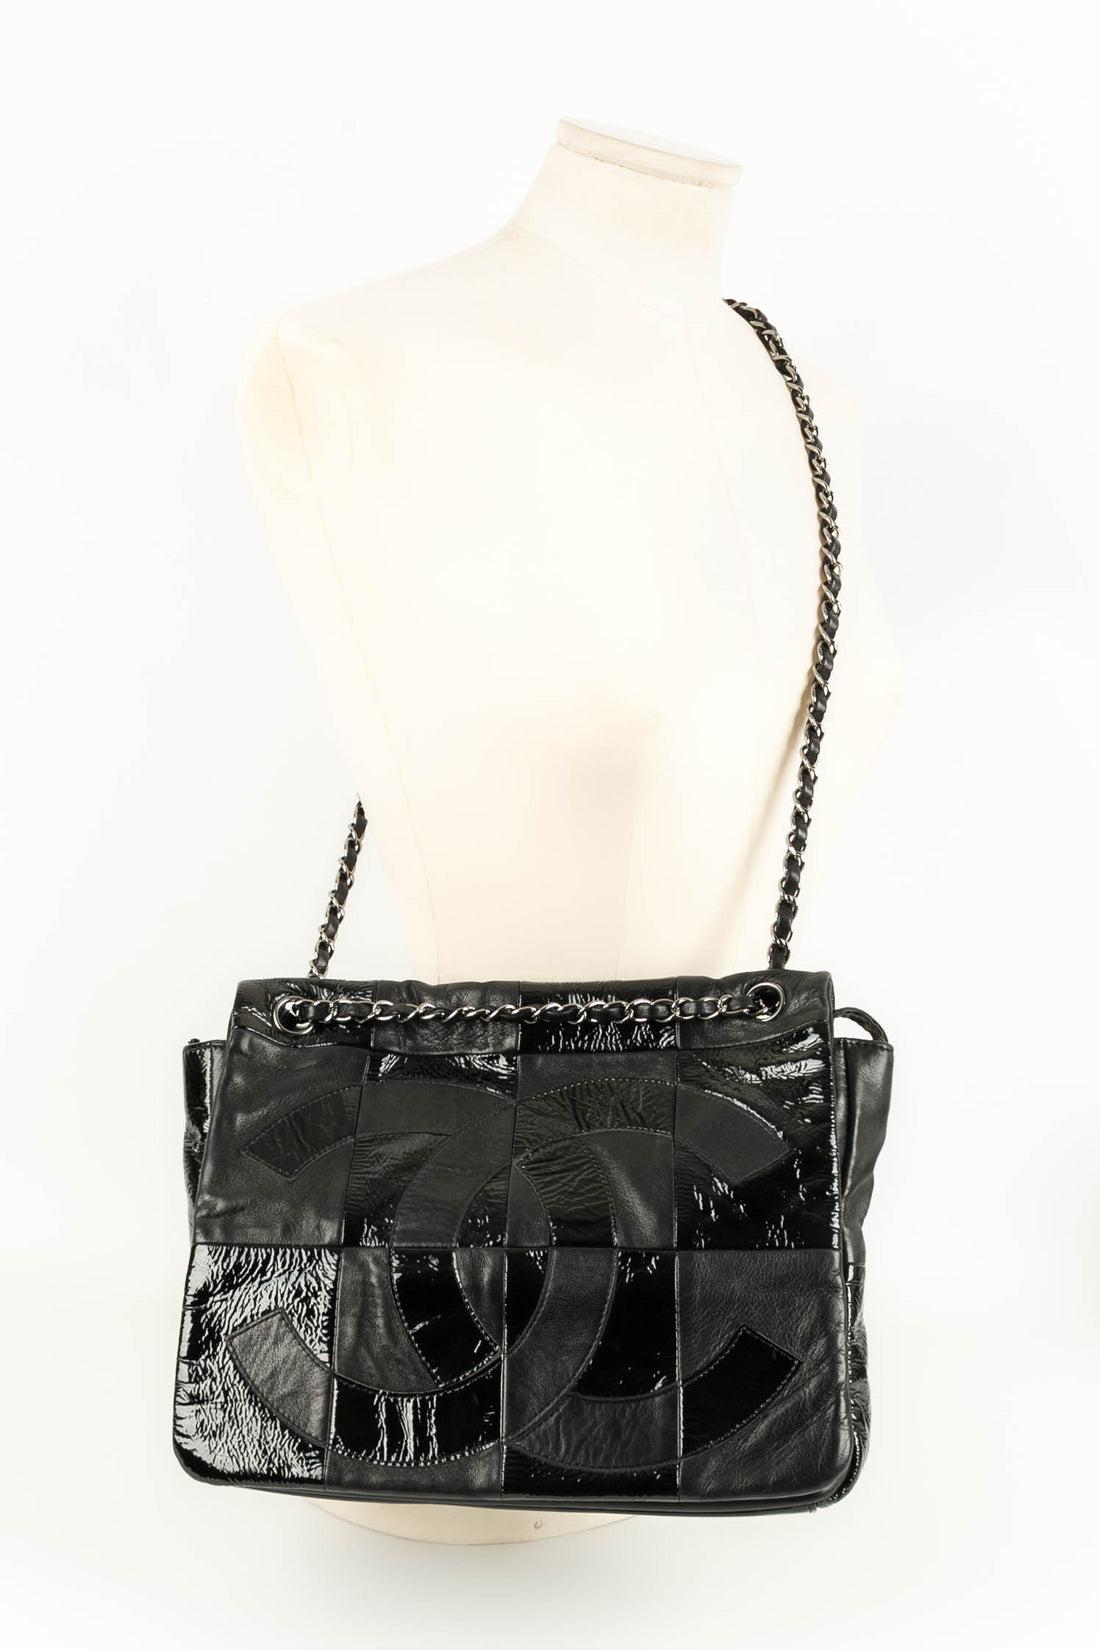 Chanel Black Patent Leather Patchwork Bag, 2006/2007 For Sale 7